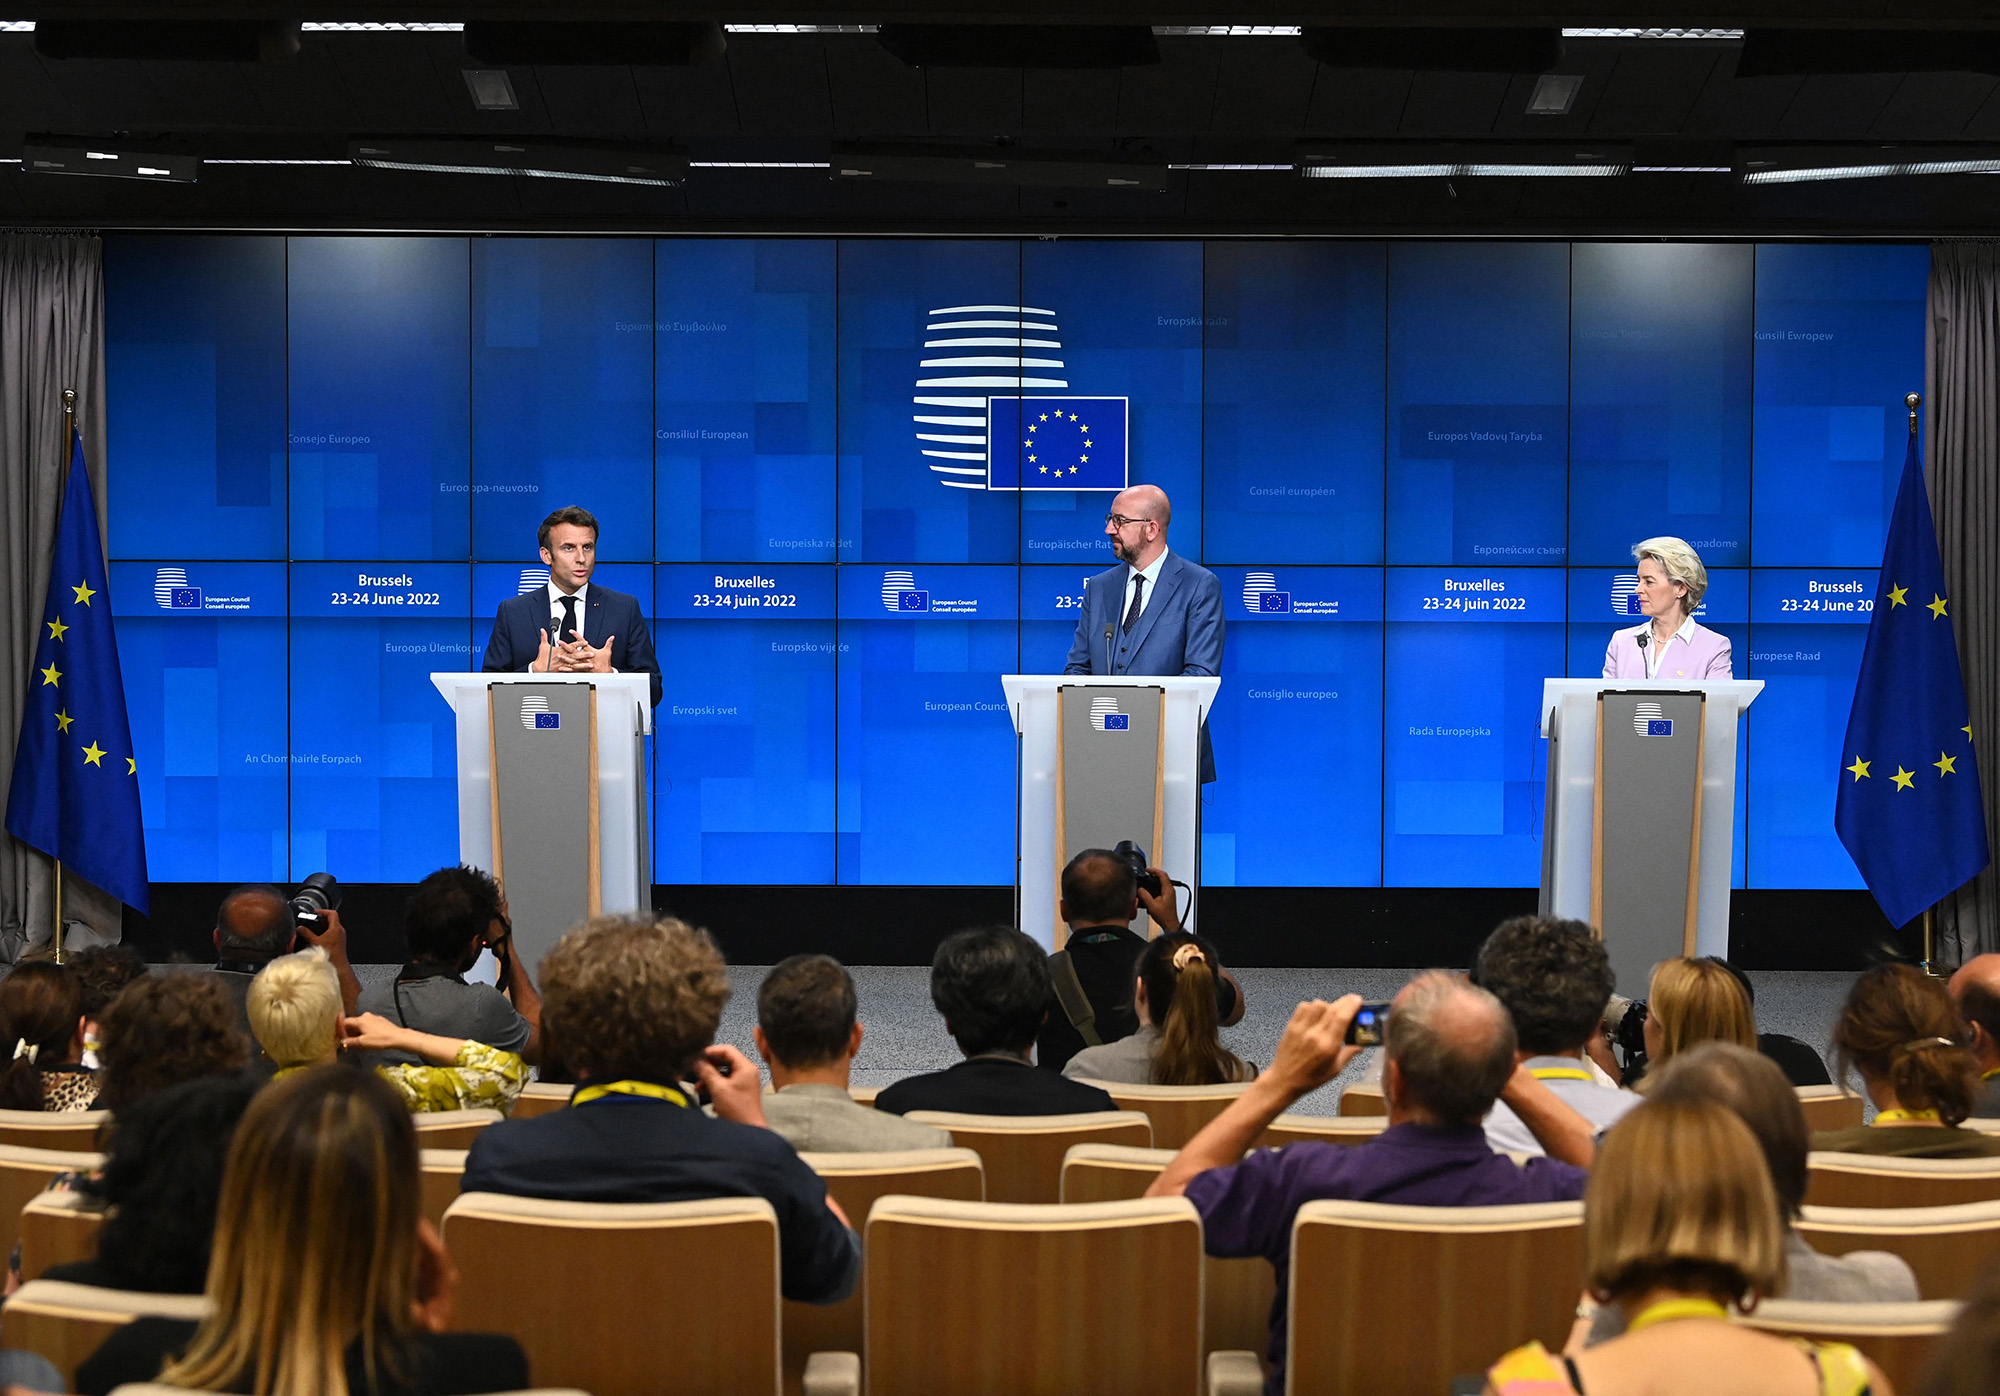 France's President Emmanuel Macron, left, President of the European Council Charles Michel, center and President of the European Commission Ursula von der Leyen, right, attend a press conference after a European Council meeting where they granted Ukraine and Moldova EU candidacy status in Brussels, Belgium, on June 23.